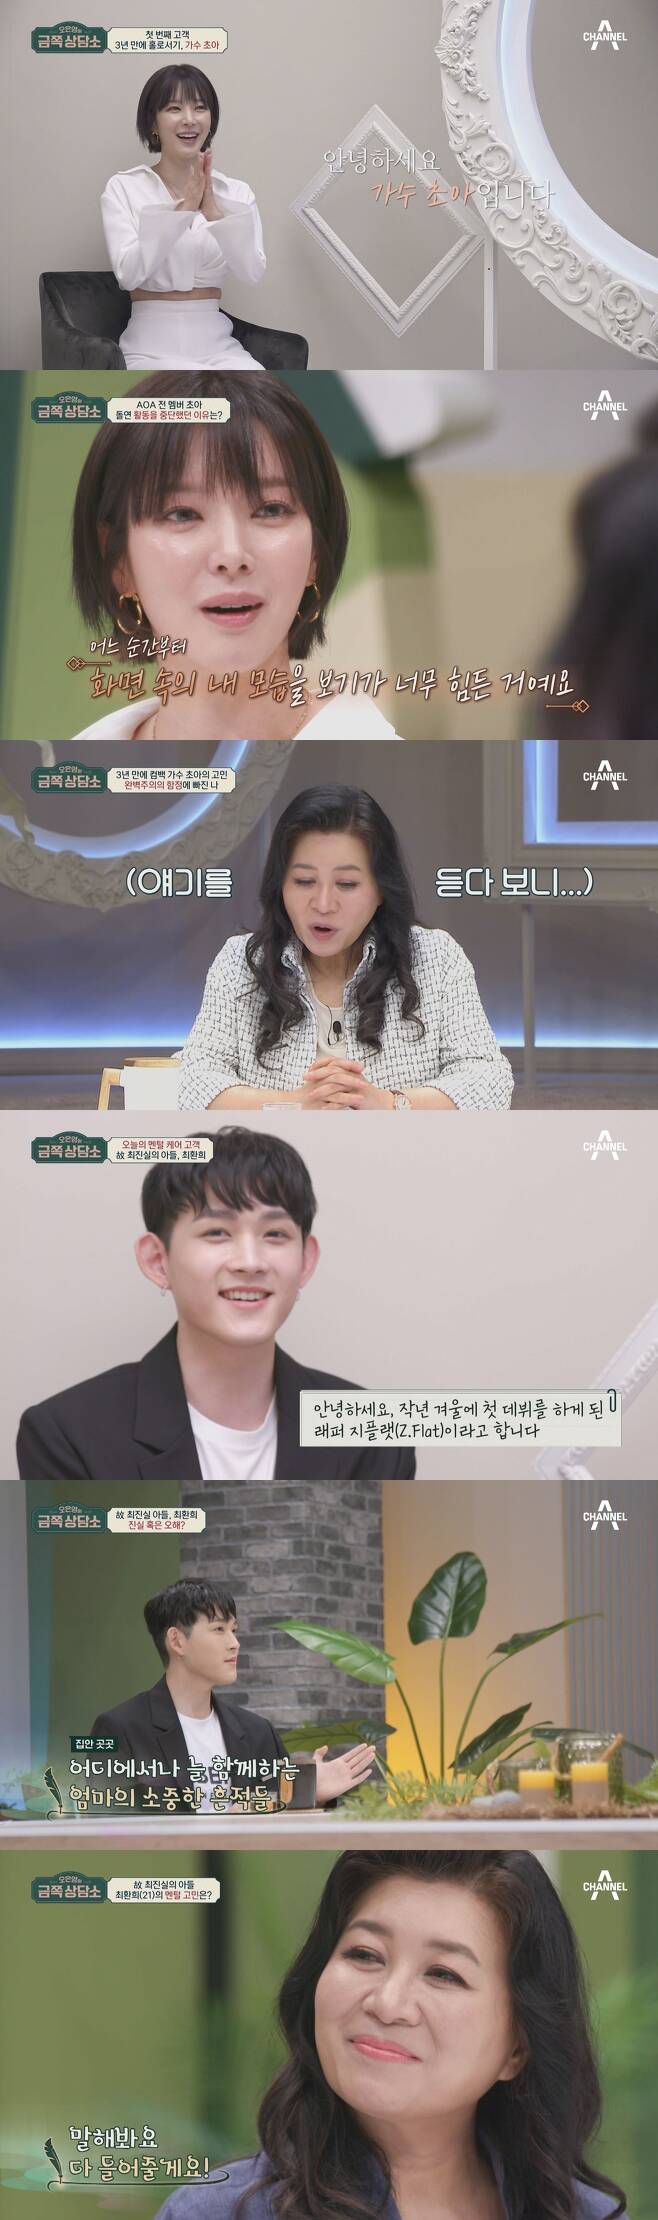 The late Choi Jin-sil, son Zeppet and Oh Eun Young Doctorate met.On Channel A Oh Eun-youngs Gold Counseling Center, which airs on September 24, former AOA singer Park Choa, who has become a soloist, and Ji Flat (real name Choi Hwanhee), the son and new rapper of the late Choi Jin-sil, will appear.Park Choa, who appeared as the first customer, surprises Midam, who was impressed by Jeong Hyeong-don during the Blady era.Park Choa, who had been inactive and depressed, first contacted Park Choa to buy rice and consulted him steadily. It is the back door that Park Narae was surprised by the charm of the Reversal story sweet of Jin Young-don.Park Choa broke the long-time Blady and returned, so he continued to say a word carefully for a while, and after Oh Eun Young Doctorates intensive consultation, he told me about his feelings that he could not solve anywhere.Three years ago, when I was at the peak of popularity, I was forced to stop my activities. I honestly said, I wanted to run because it was hard to see me.In addition, the worries of dropping Park Choa into the worst during the three-year long Blady are also revealed.Oh Eun Young Doctorates counseling magic, which made her tearful, which showed only her bland appearance on TV, raises questions about what it will be.The second customer is the man who made Oh Eun Young Doctorate nervous, the son of Choi Jin-sil, who is Memory of the heartache of the people.However, he was an innocent young man in his 20s, unlike his expectations, and he solved good memories with his parents and made everyone inducing virtue.After his troubles, which were caused by the inability to escape from the shadows of his late parents, were revealed, and Oh Eun Young Doctorate and other handmade students were embarrassed.